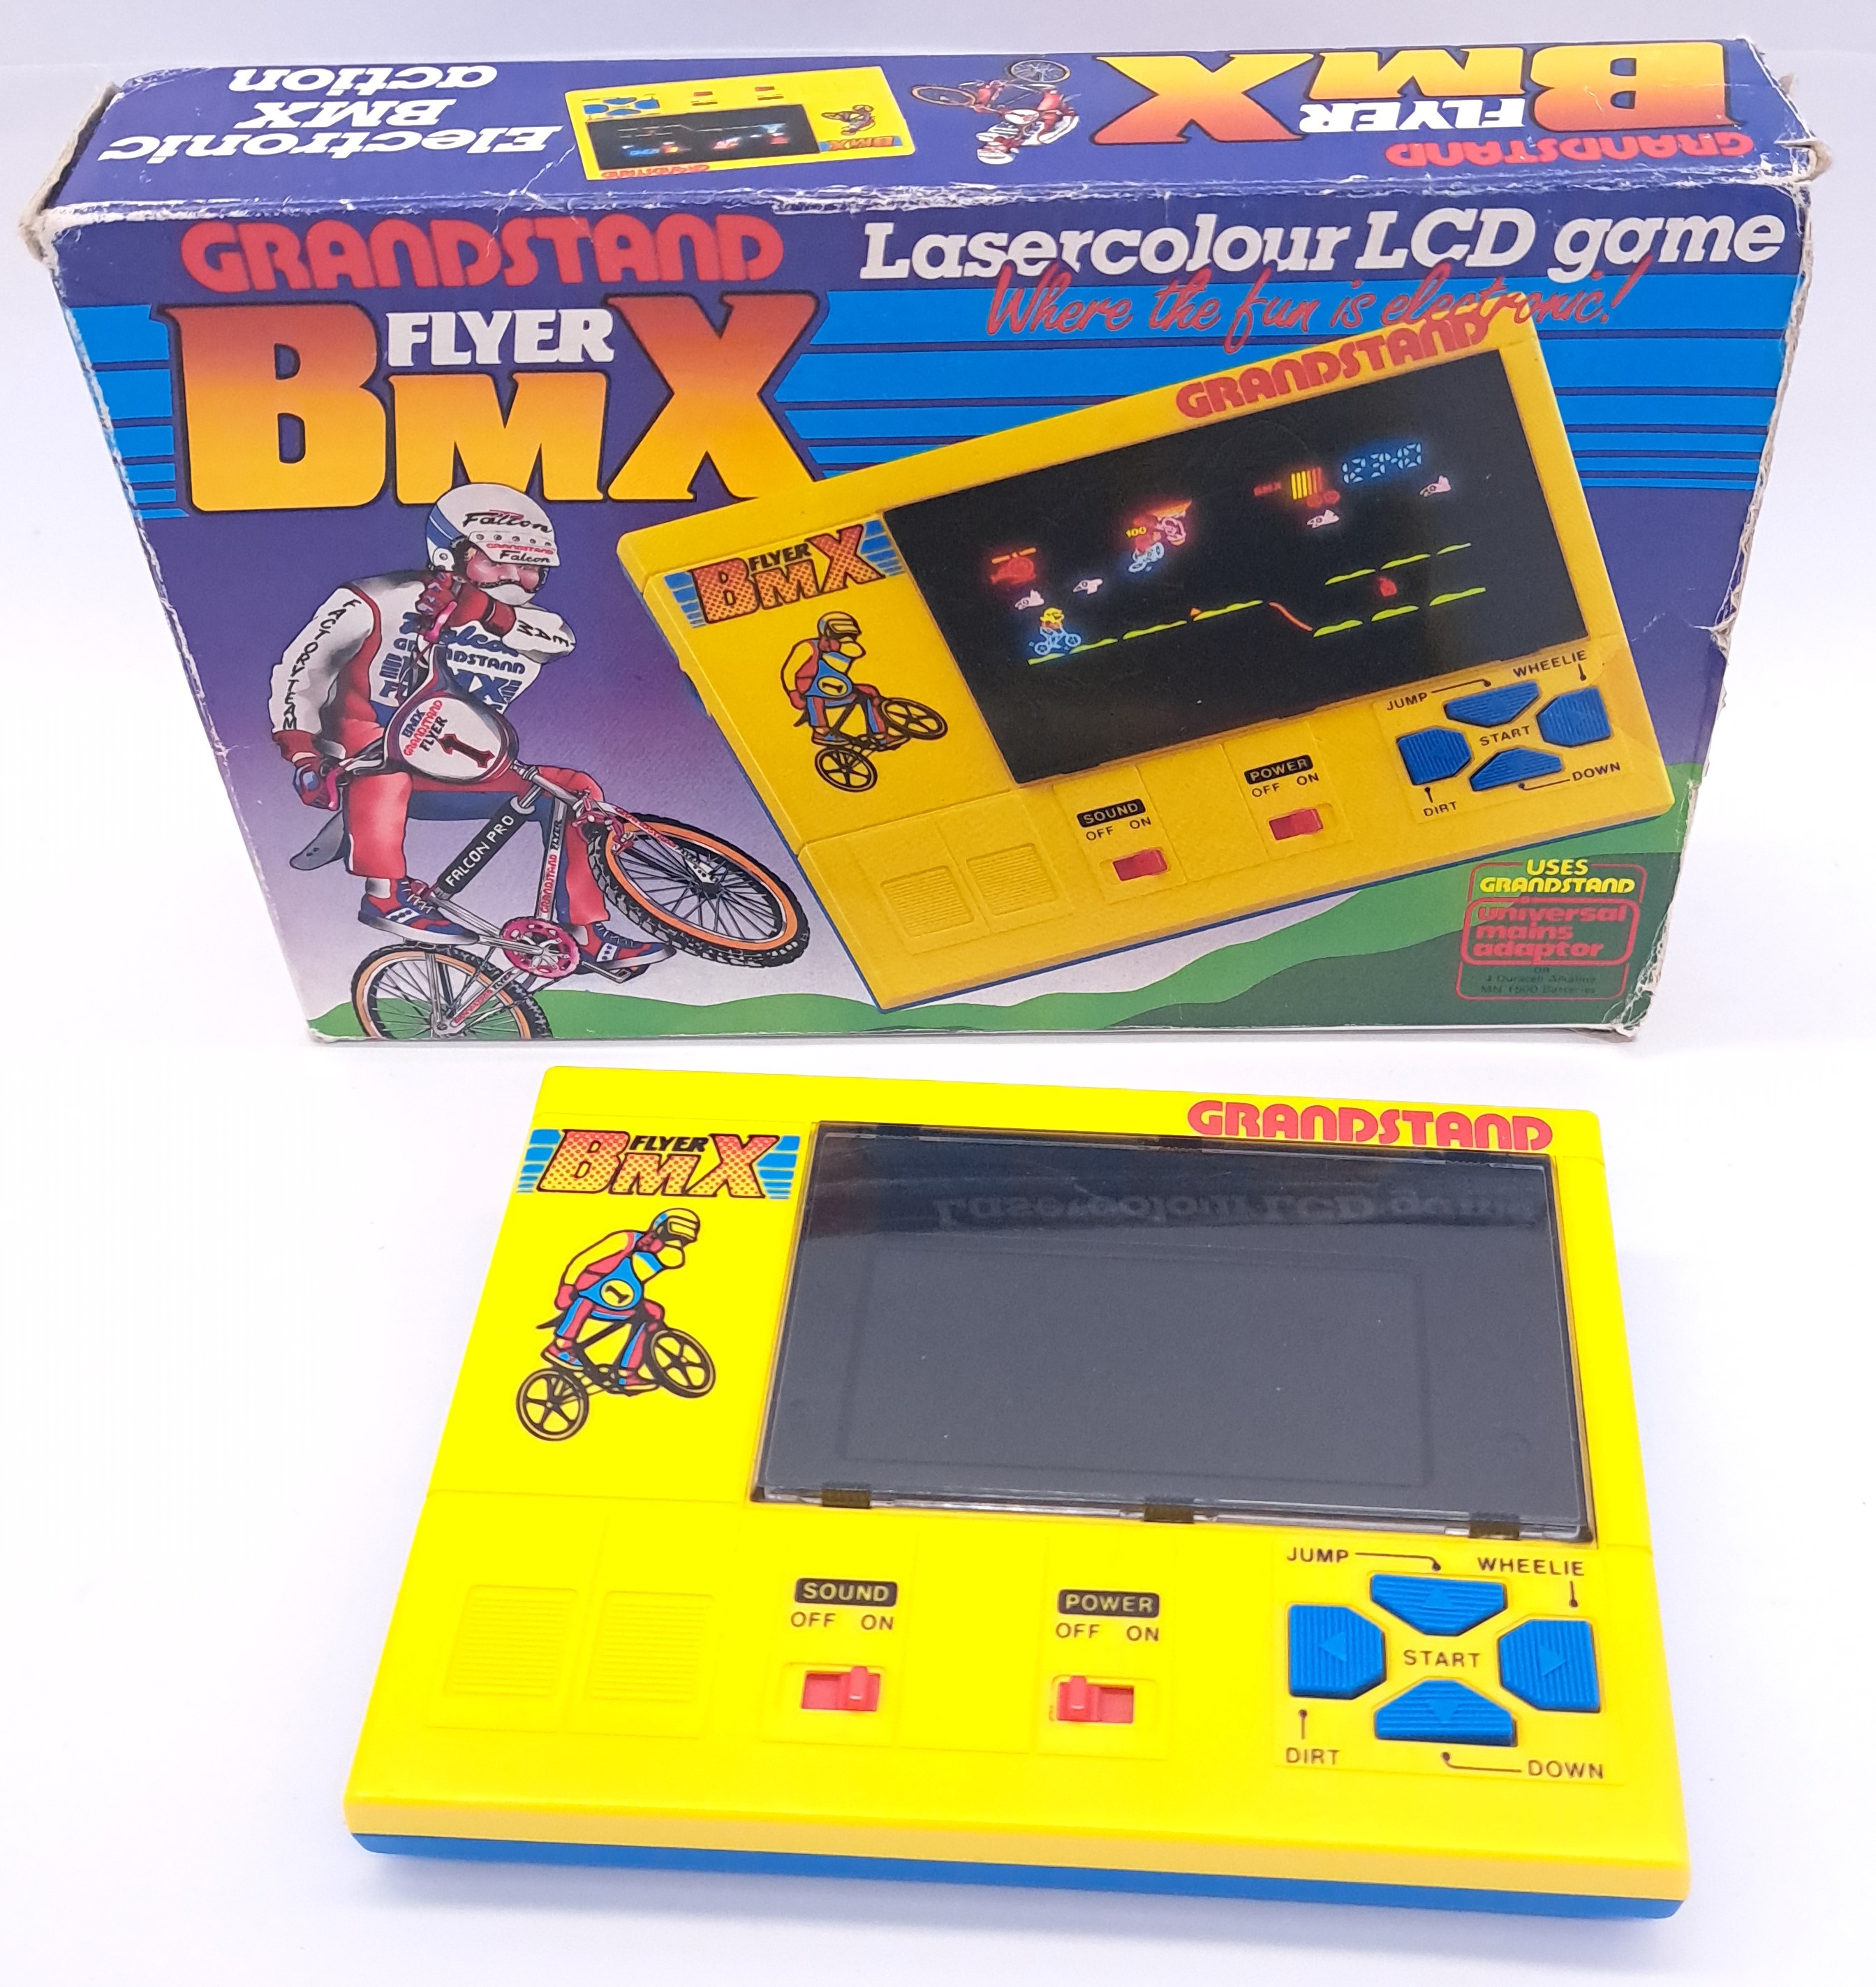 Vintage/Retro Gaming. Grandstand "BMX Flyer" 1983 Handheld  Lasercolour Game Console - Image 4 of 6